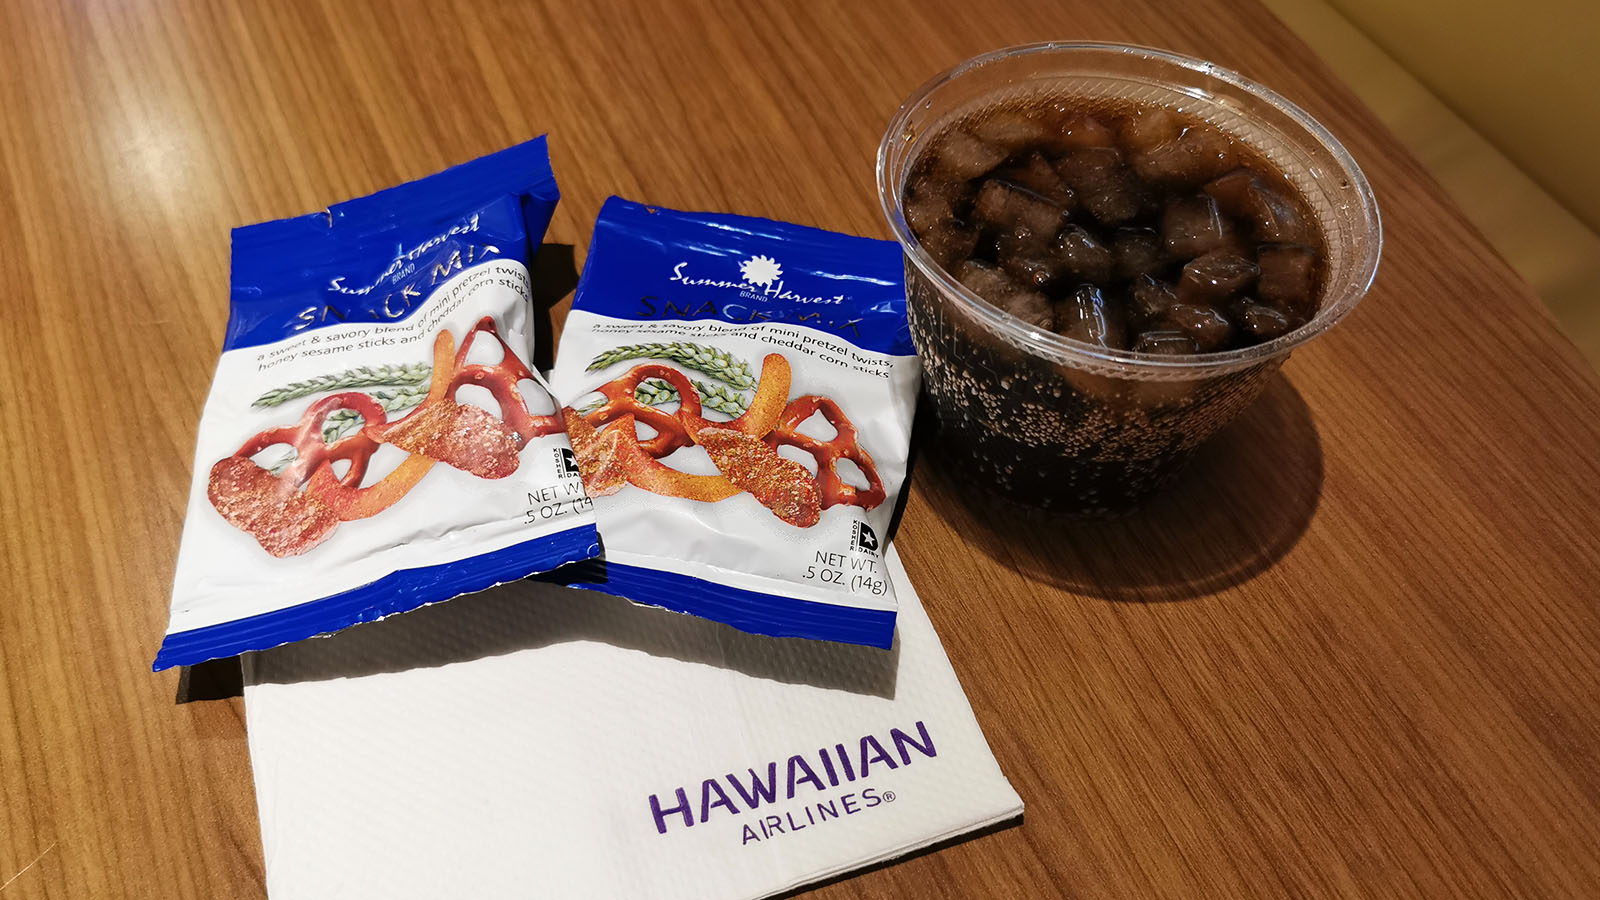 Pretzels and Diet Coke in Hawaiian Airlines' lounge